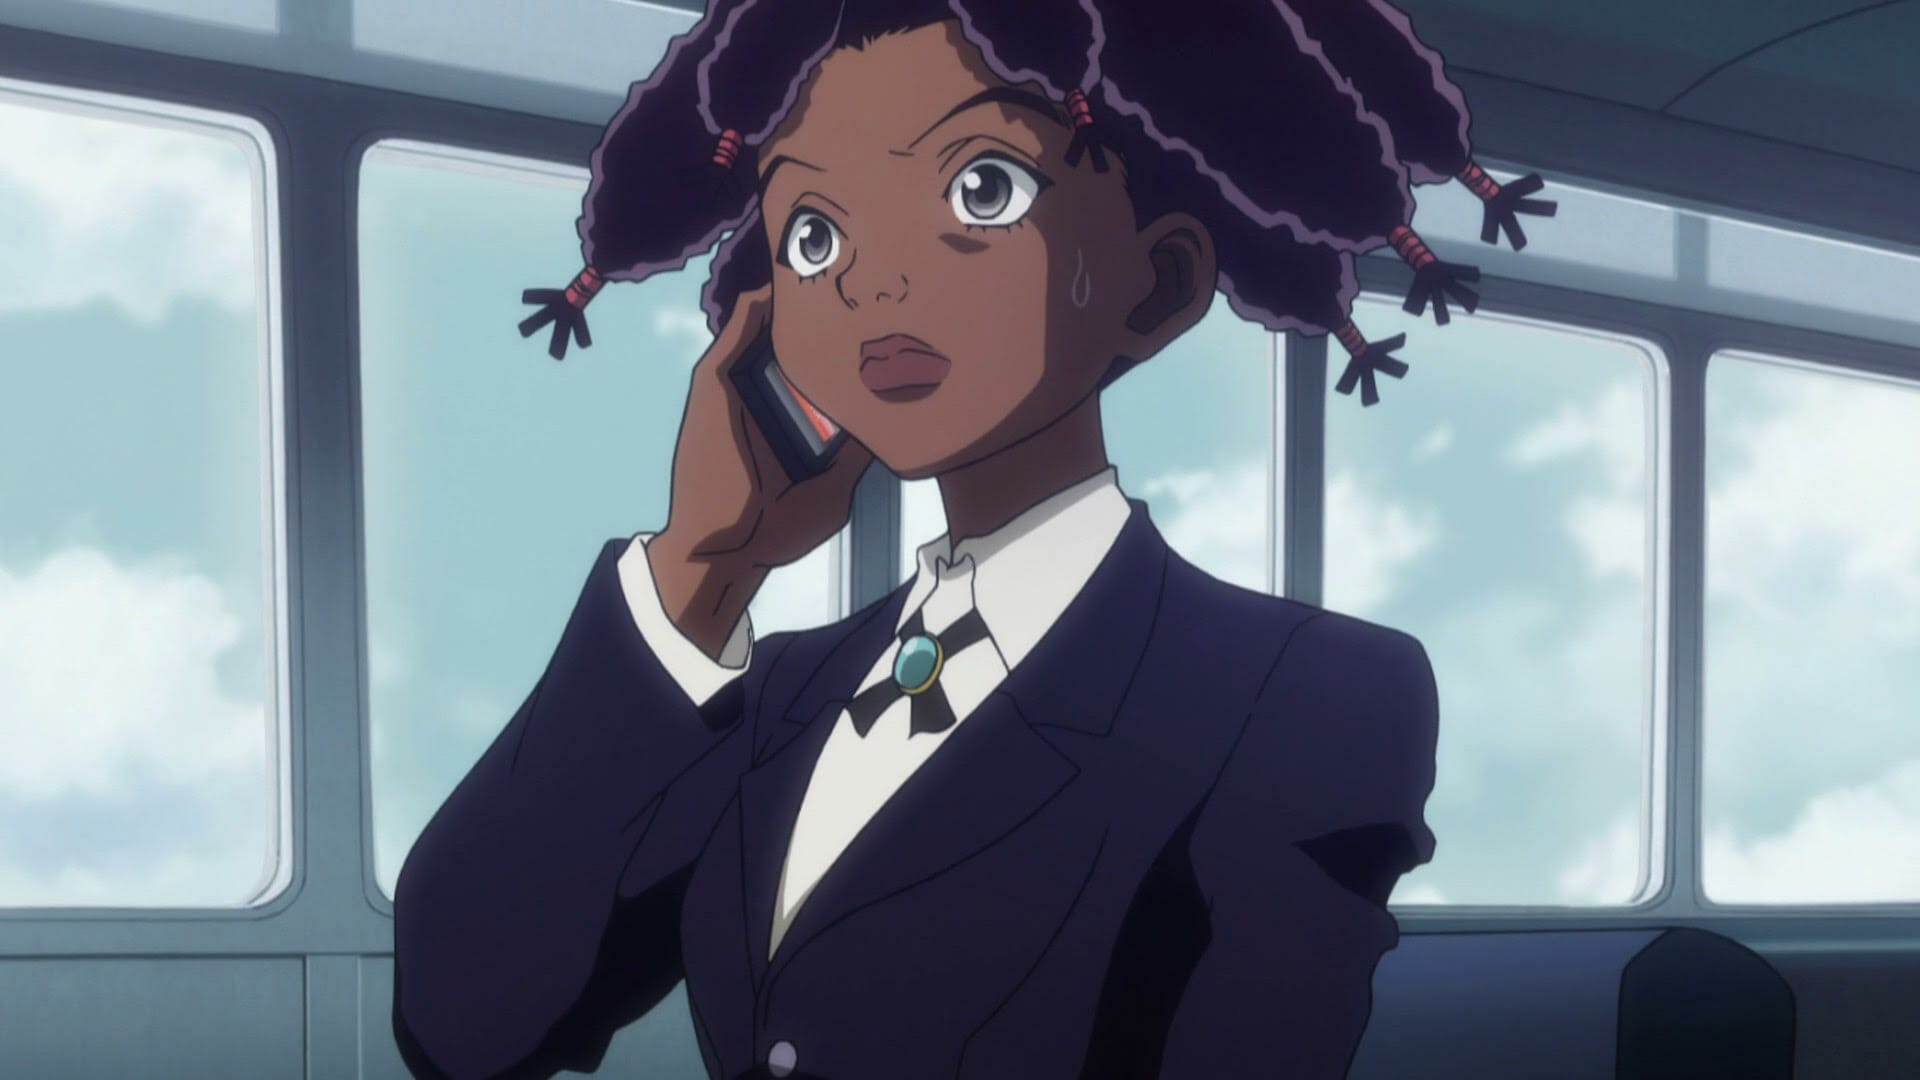 Canary from Hunter x Hunter, on the phone and looking businesslike.